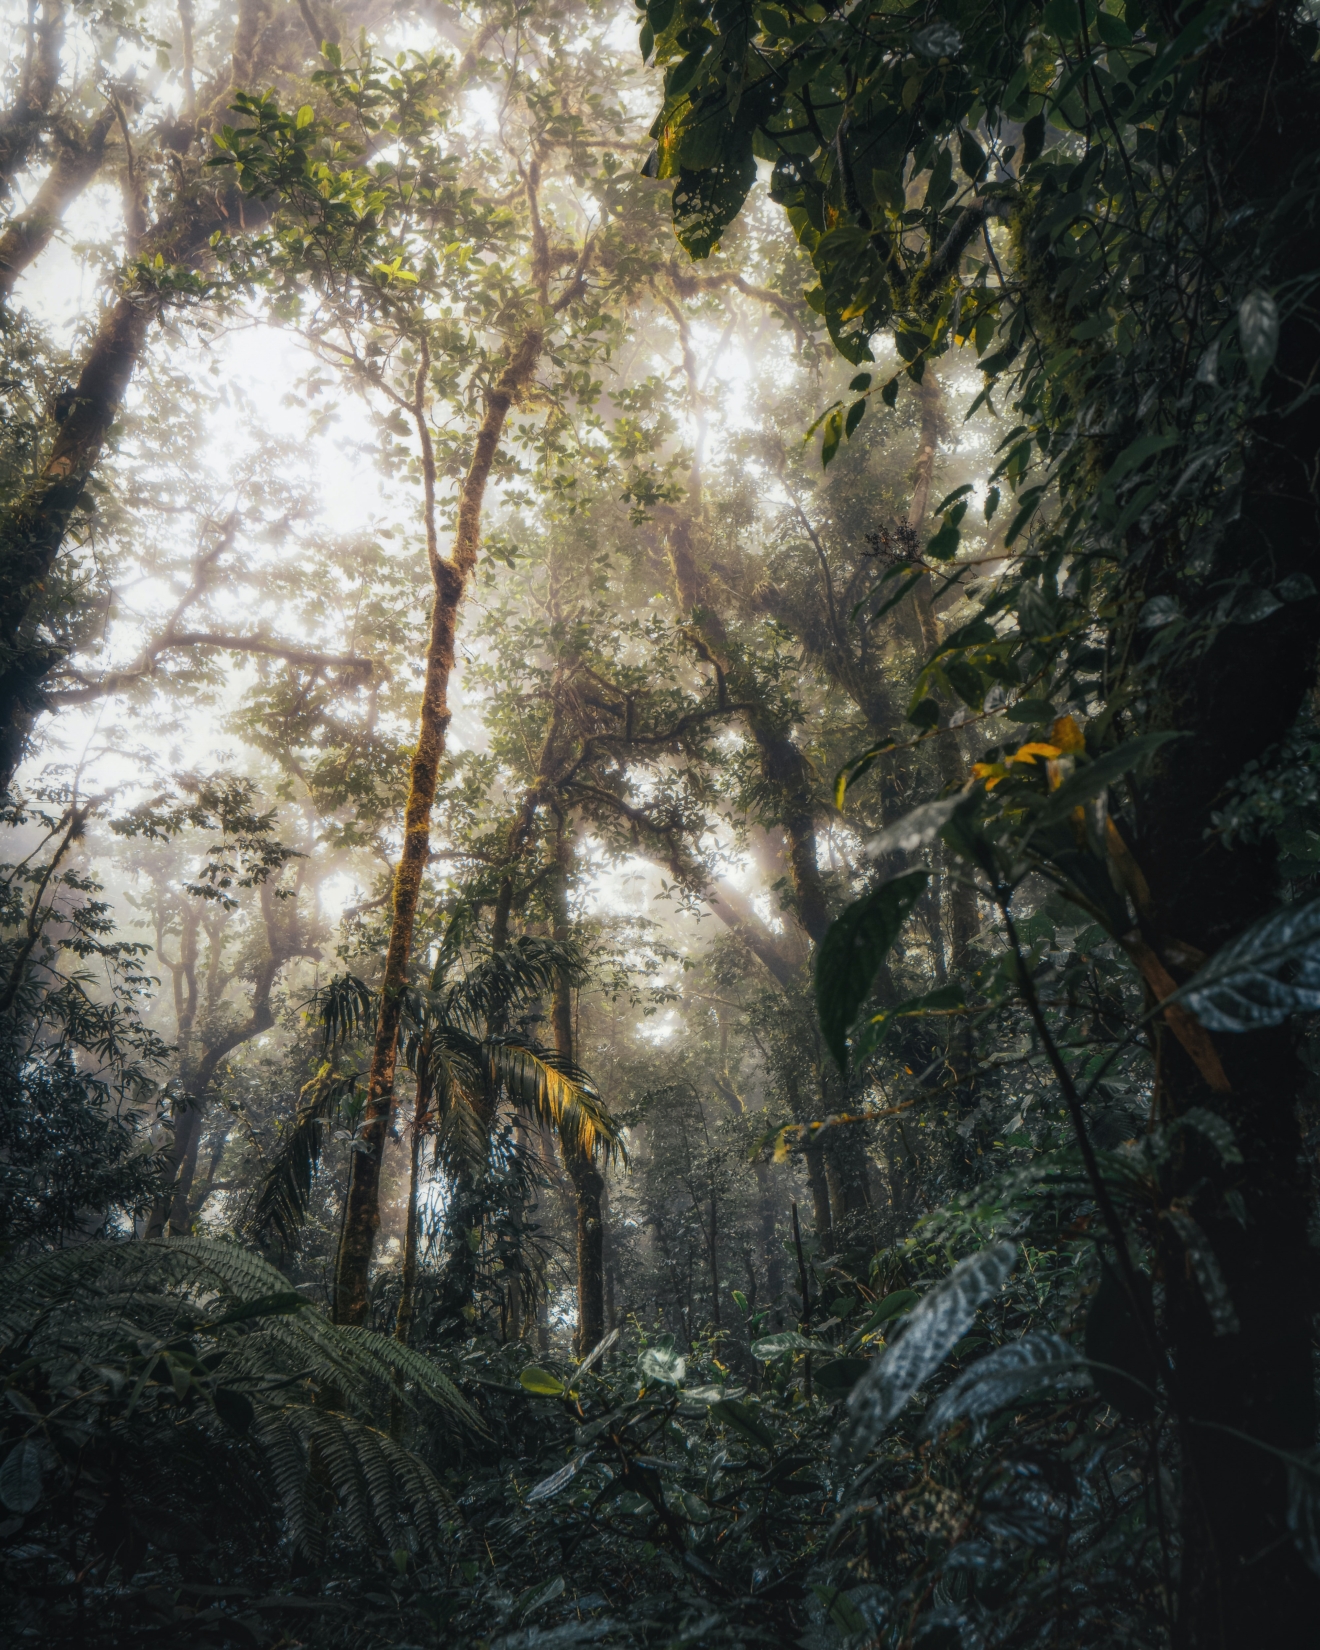 Cloud forests provide cover in an dense jungle in Costa Rica